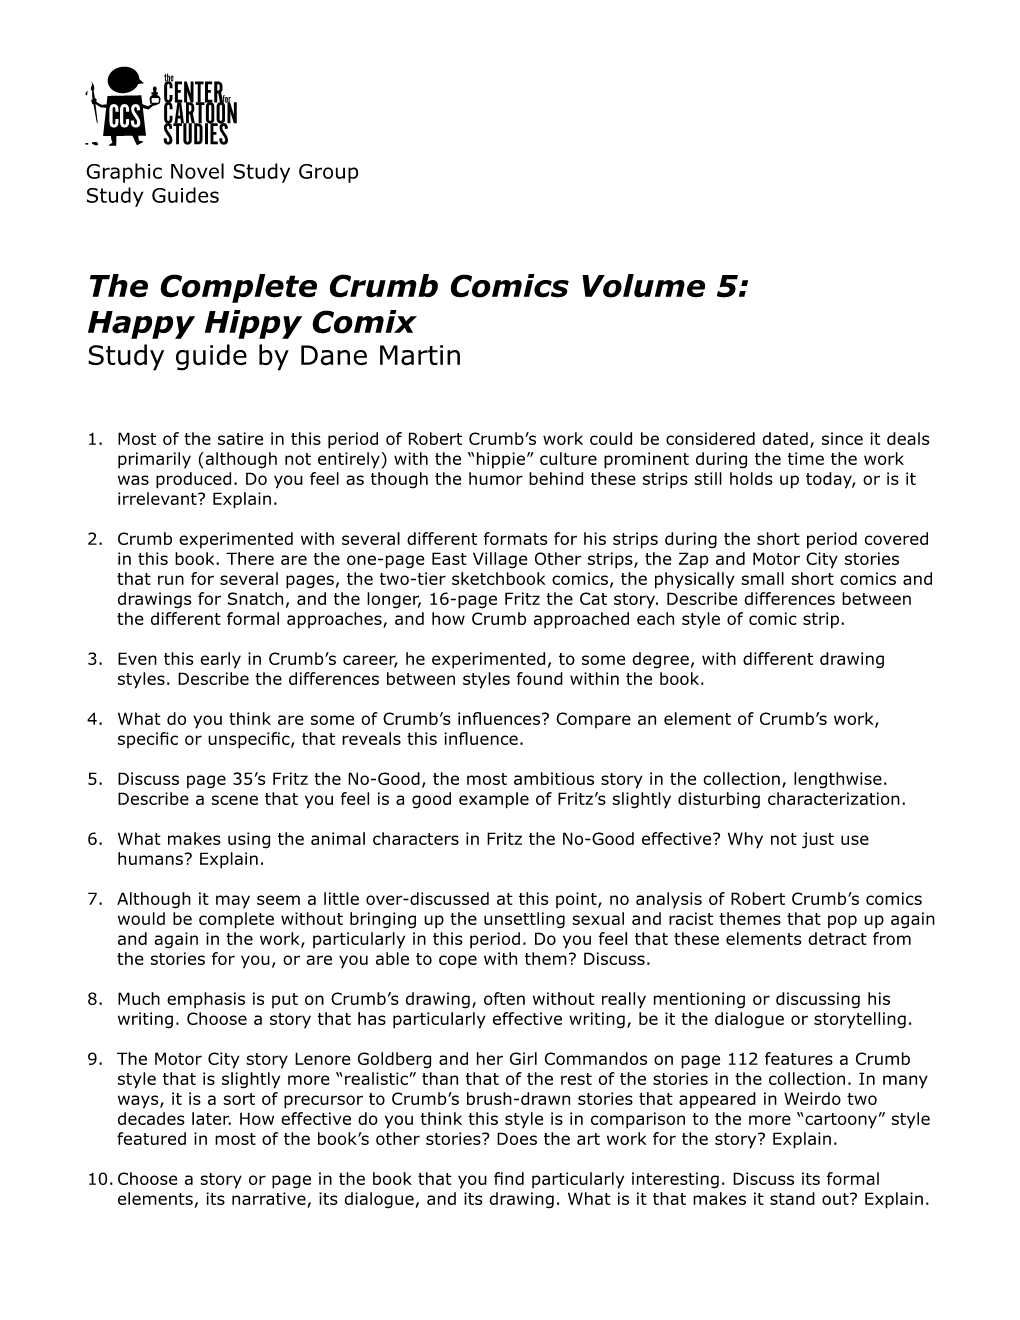 The Complete Crumb Comics Volume 5: Happy Hippy Comix Study Guide by Dane Martin